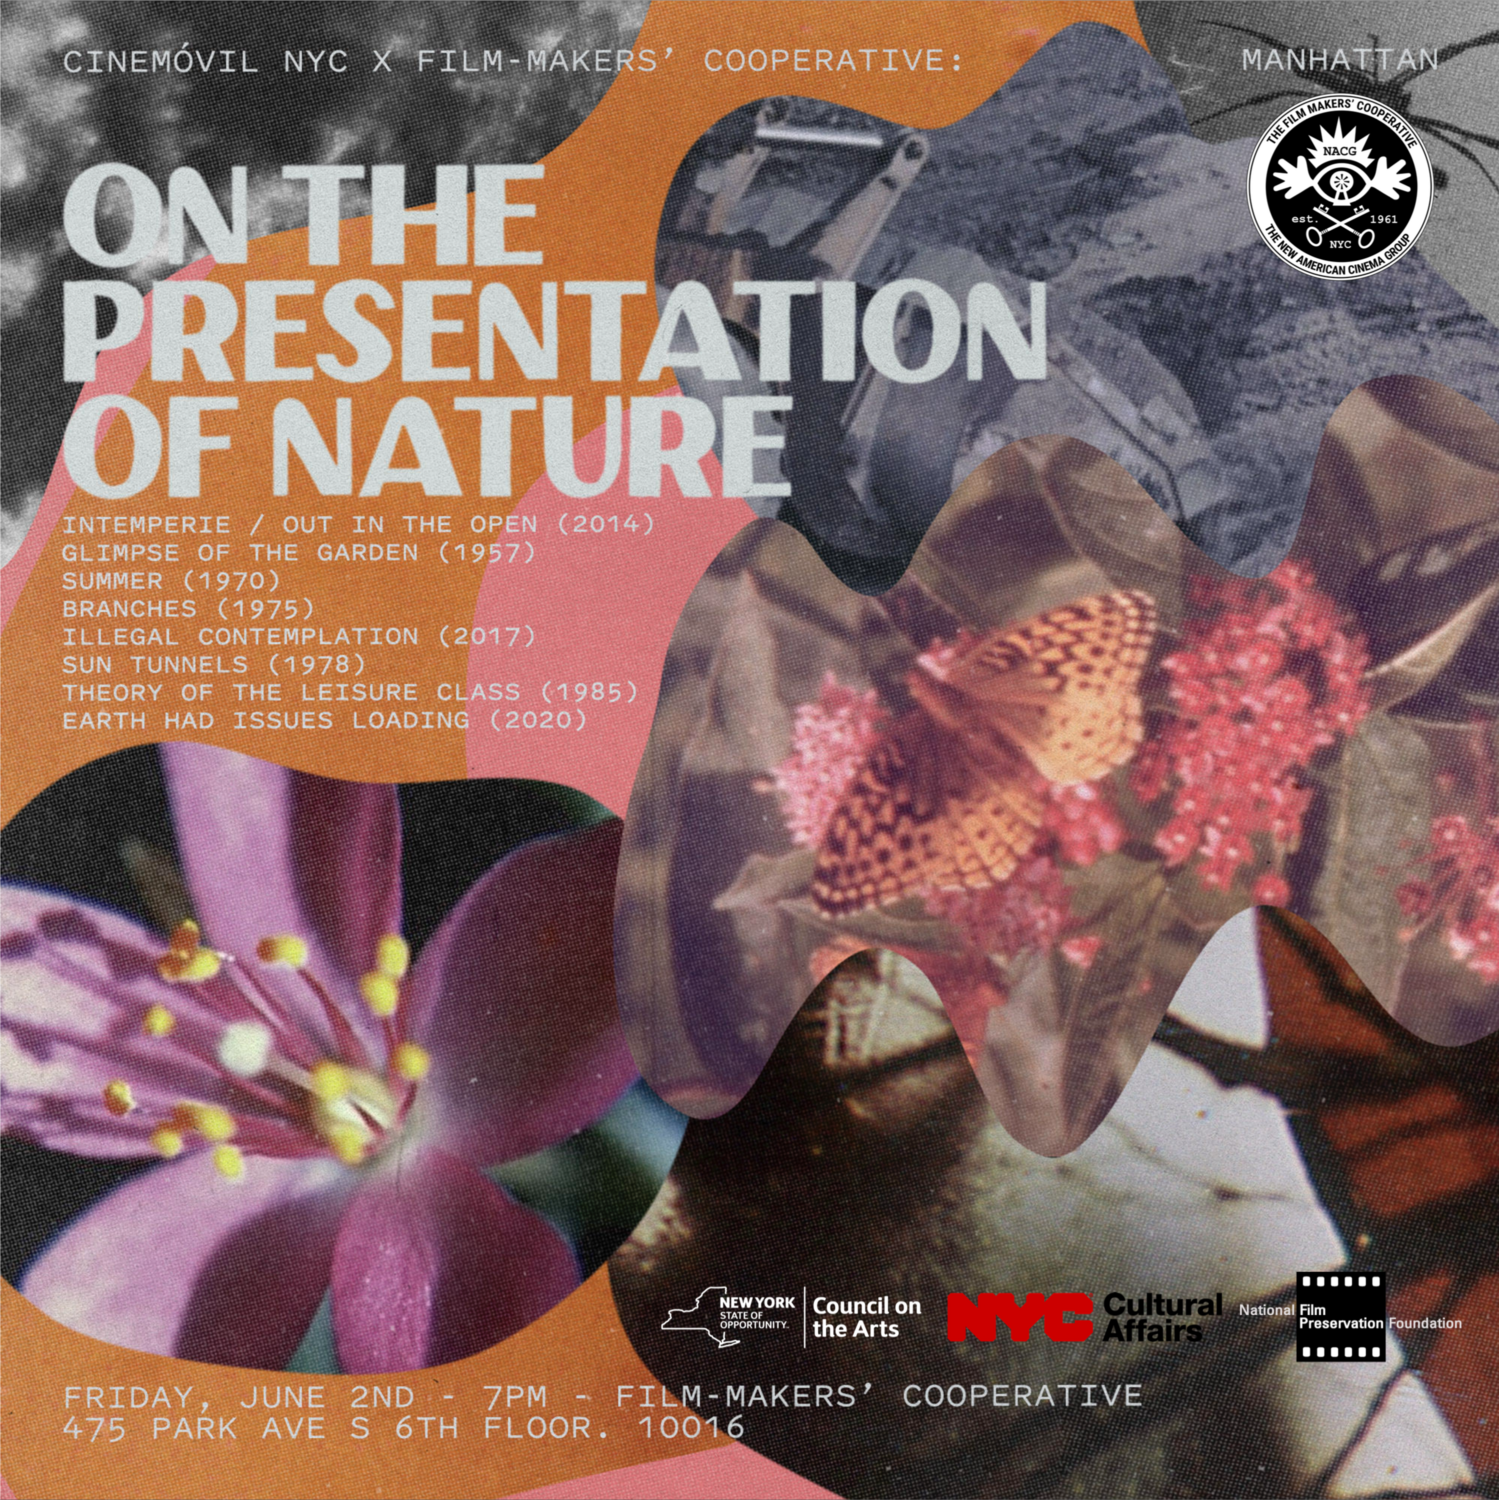 Cinemóvil NYC x Film-Makers' Cooperative: On the Presentation of Nature